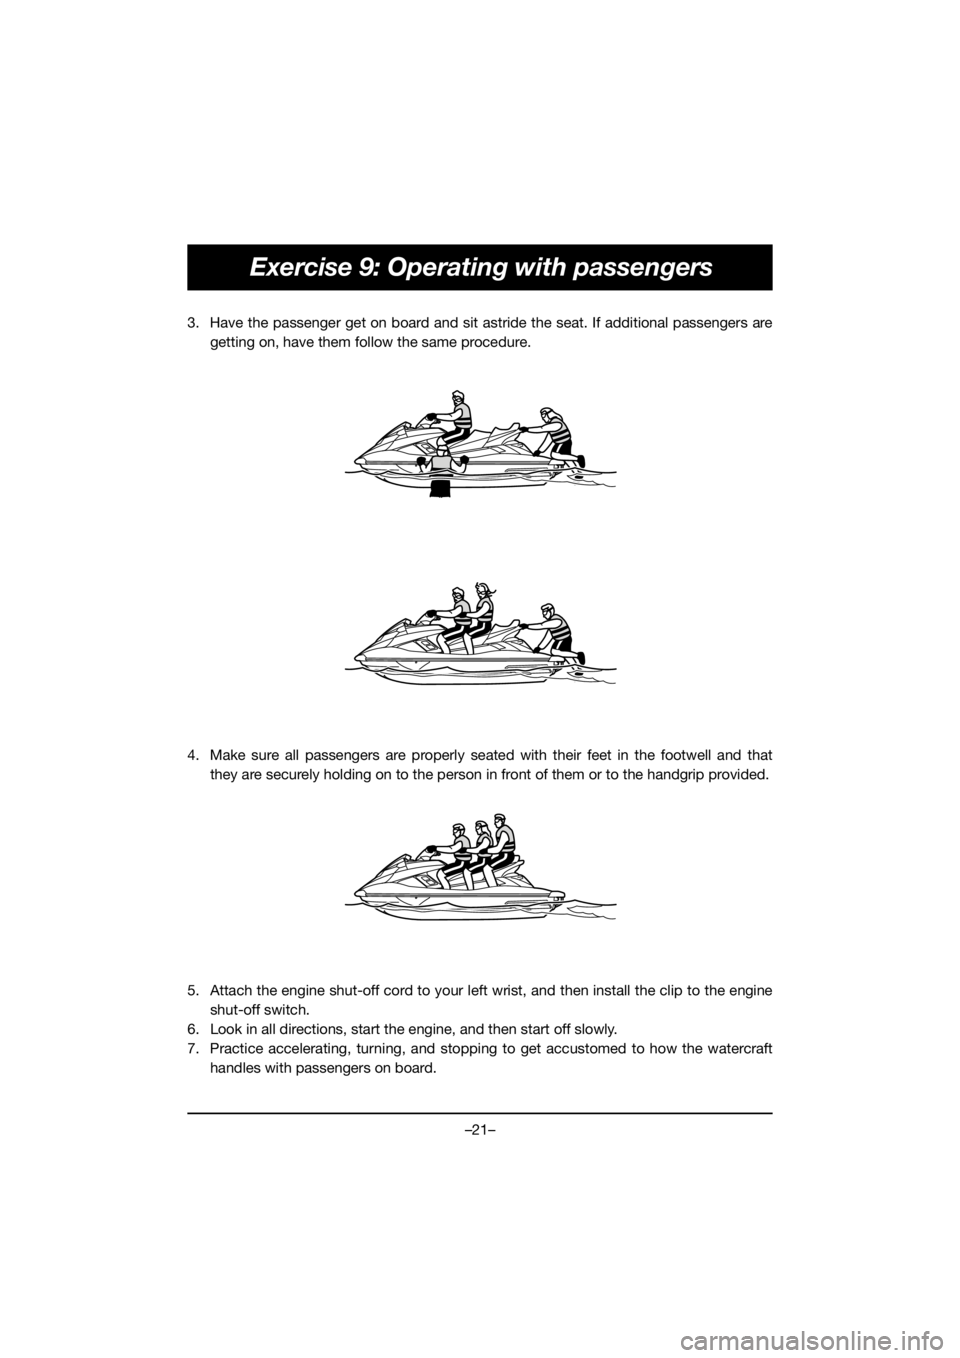 YAMAHA FX HO 2019  Manuale de Empleo (in Spanish) –21–
Exercise 9: Operating with passengers
3. Have the passenger get on board and sit astride the seat. If additional passengers are
getting on, have them follow the same procedure.
4. Make sure a